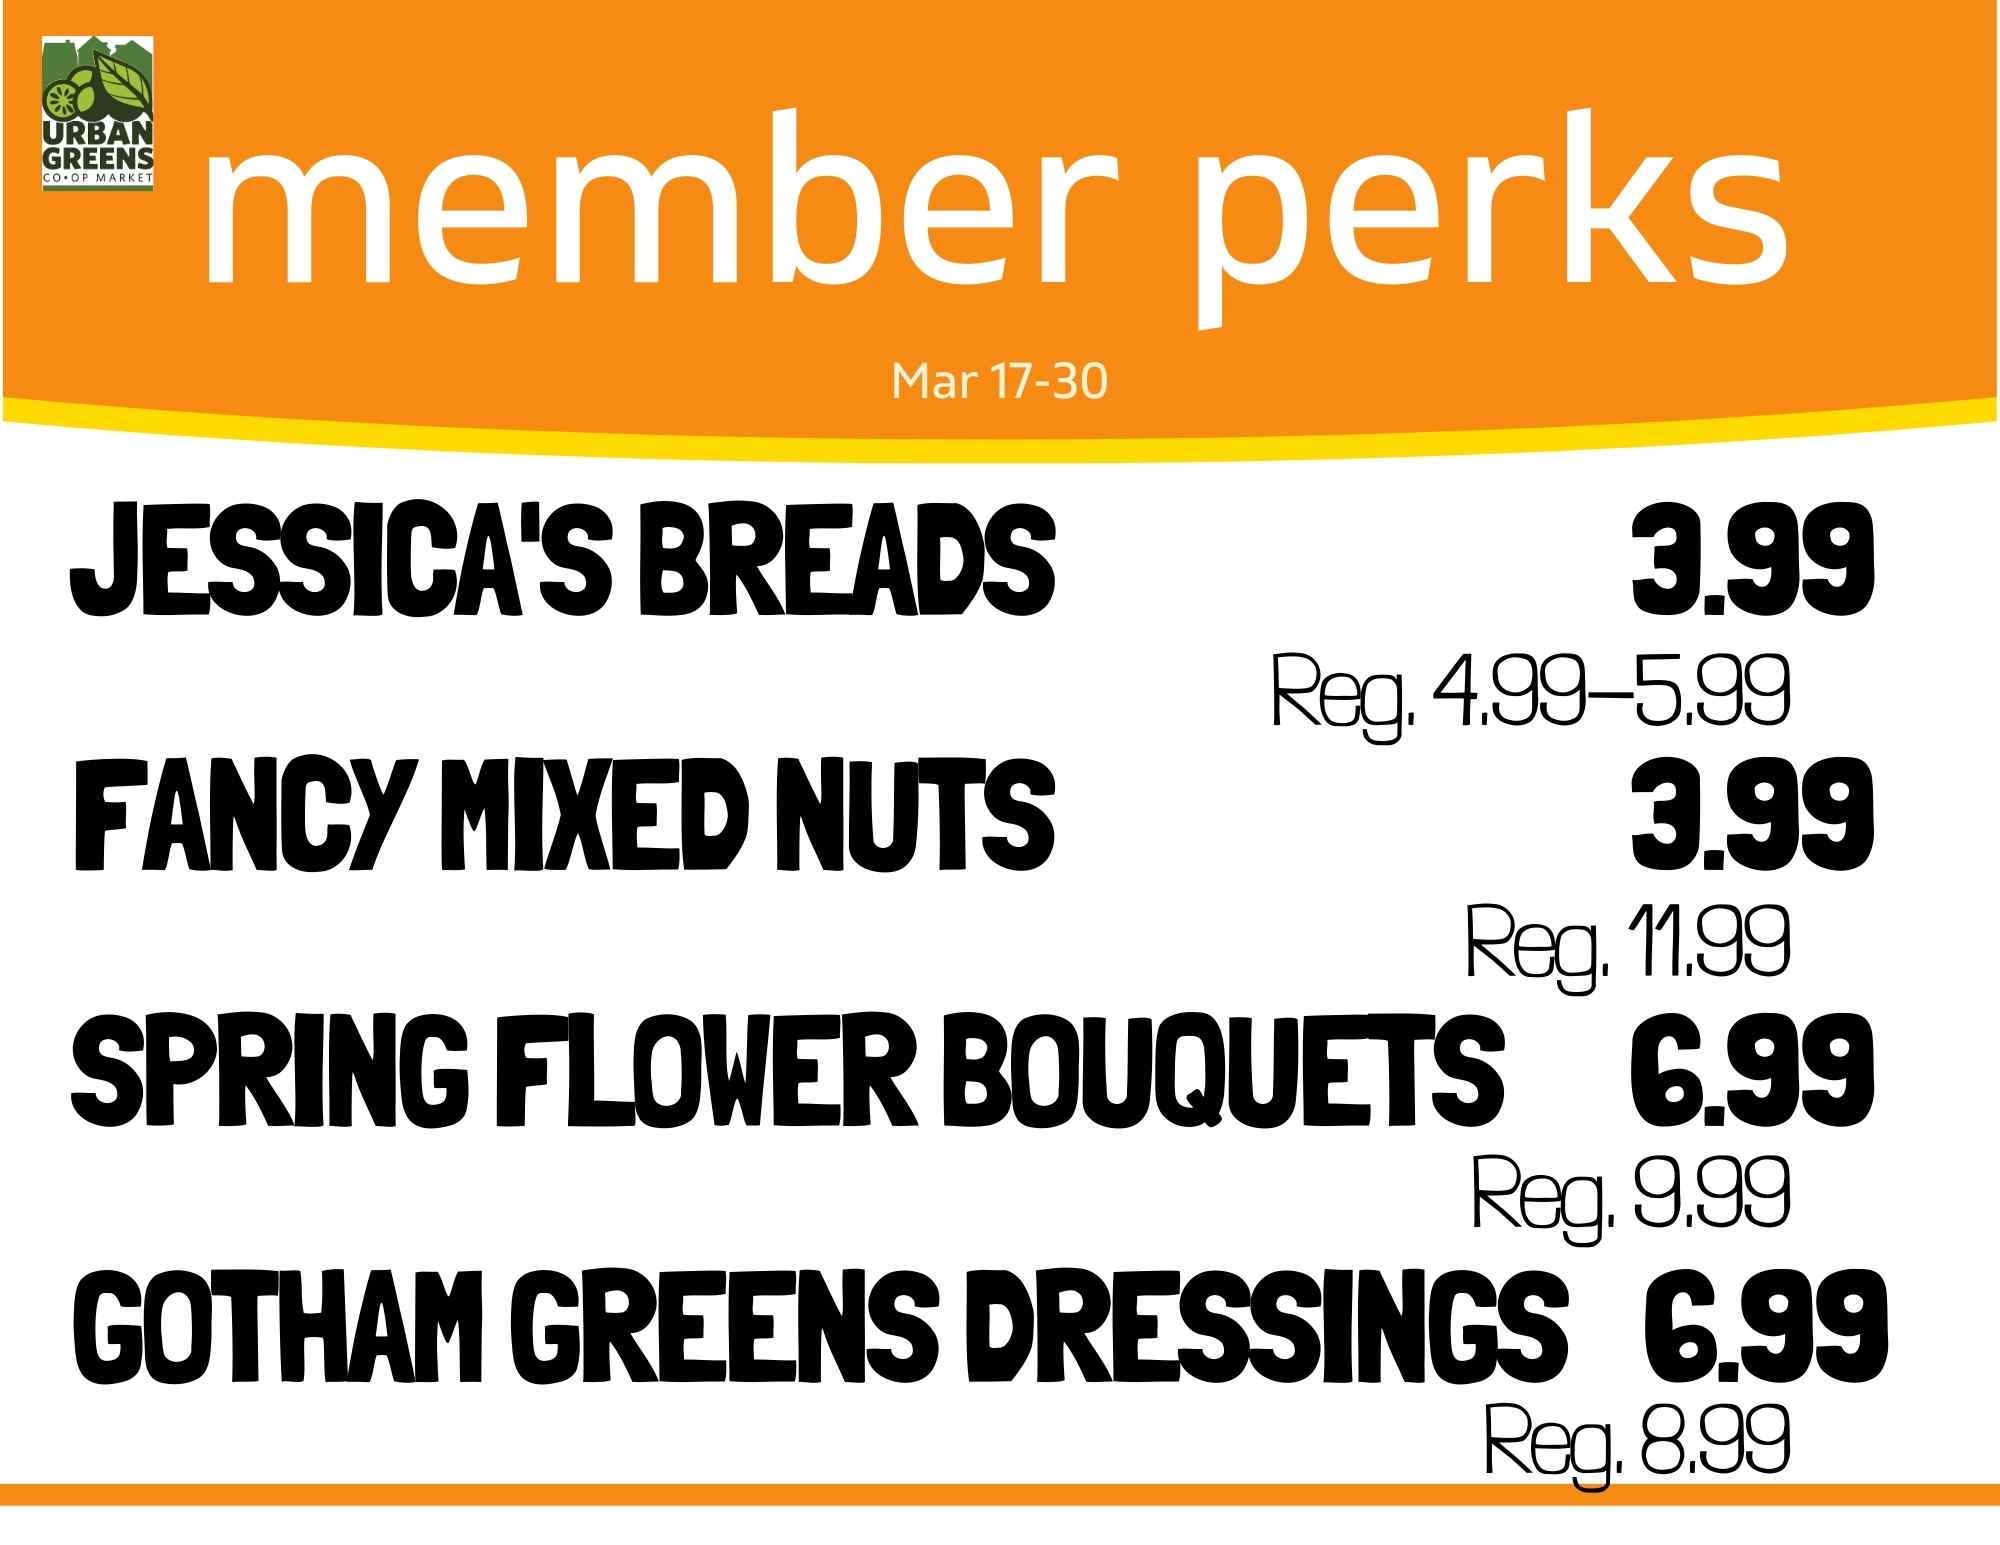 Member perks 3/17-3/30 Includes Jessica's Breads, Fancy Mixed Nuts, Spring Floral Bouquets, and Gotham Greens Dressings.